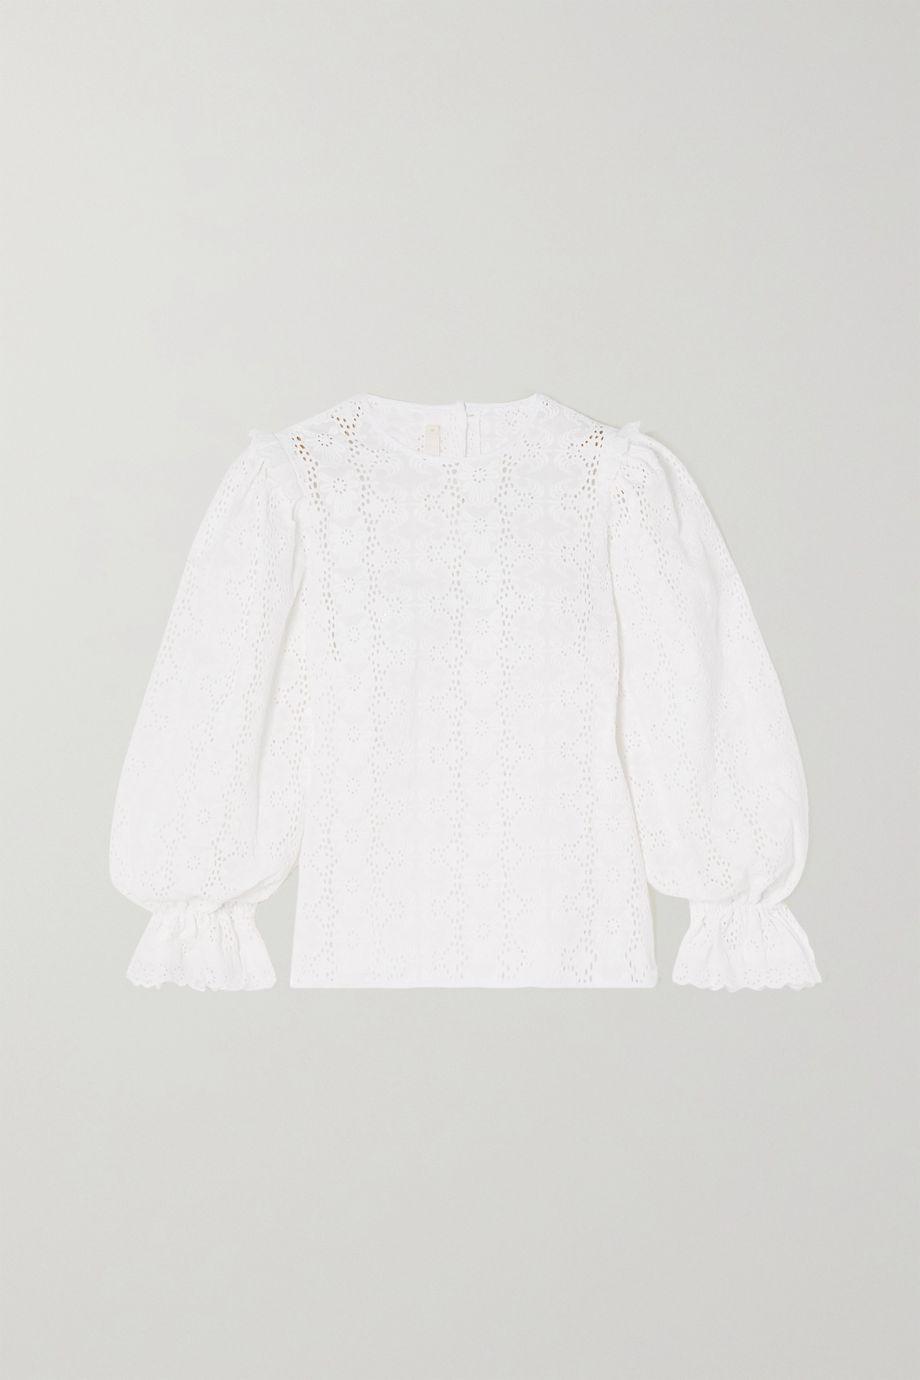 Bree broderie anglaise cotton blouse by ANNA MASON